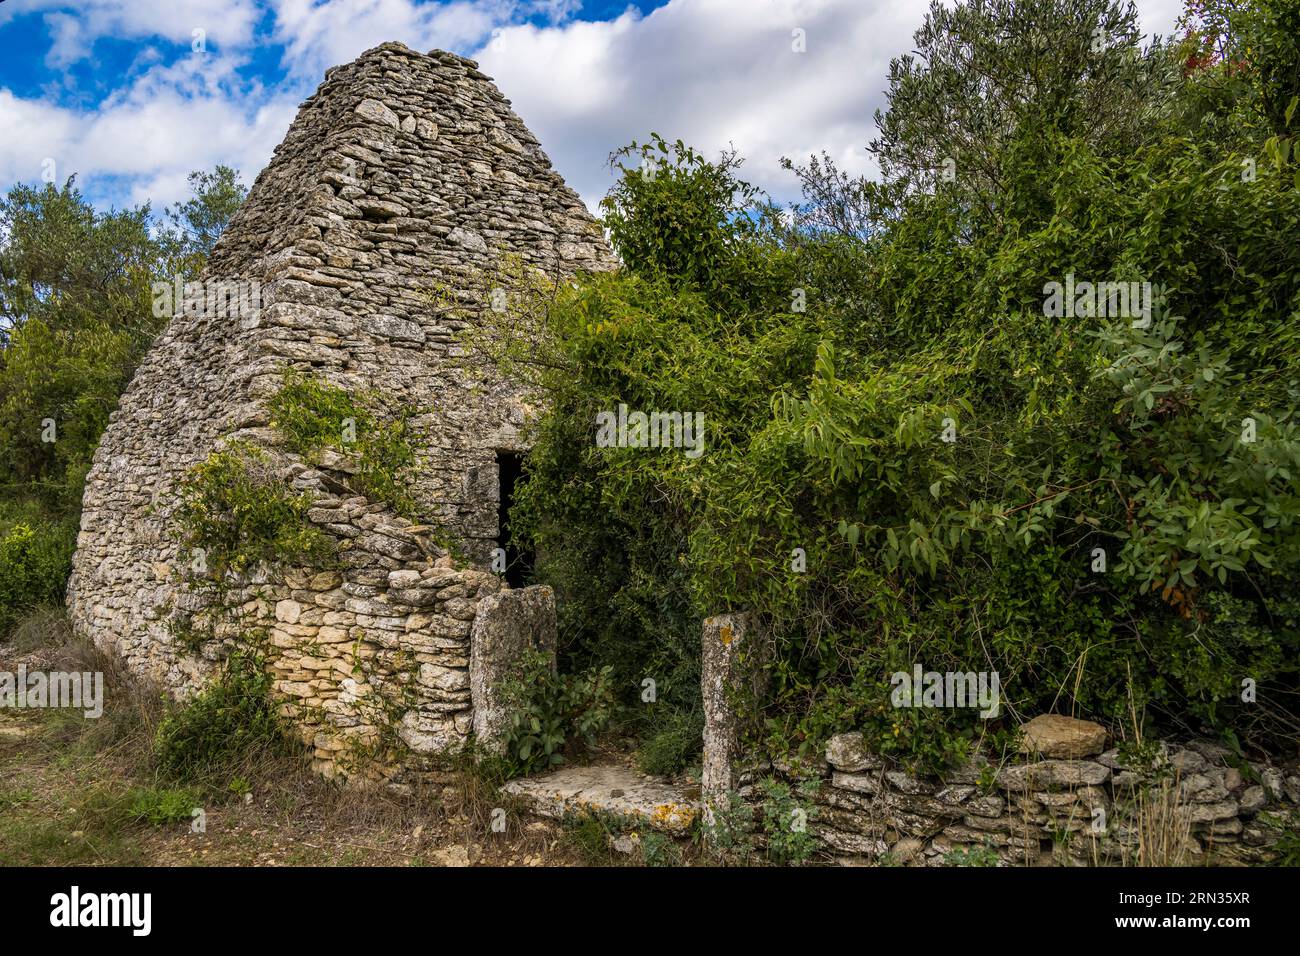 France, Gard, Uzès, capitelle, dry stone hut formerly used as a temporary shelter for small owners, their tools and their agricultural products in the scrubland Stock Photo